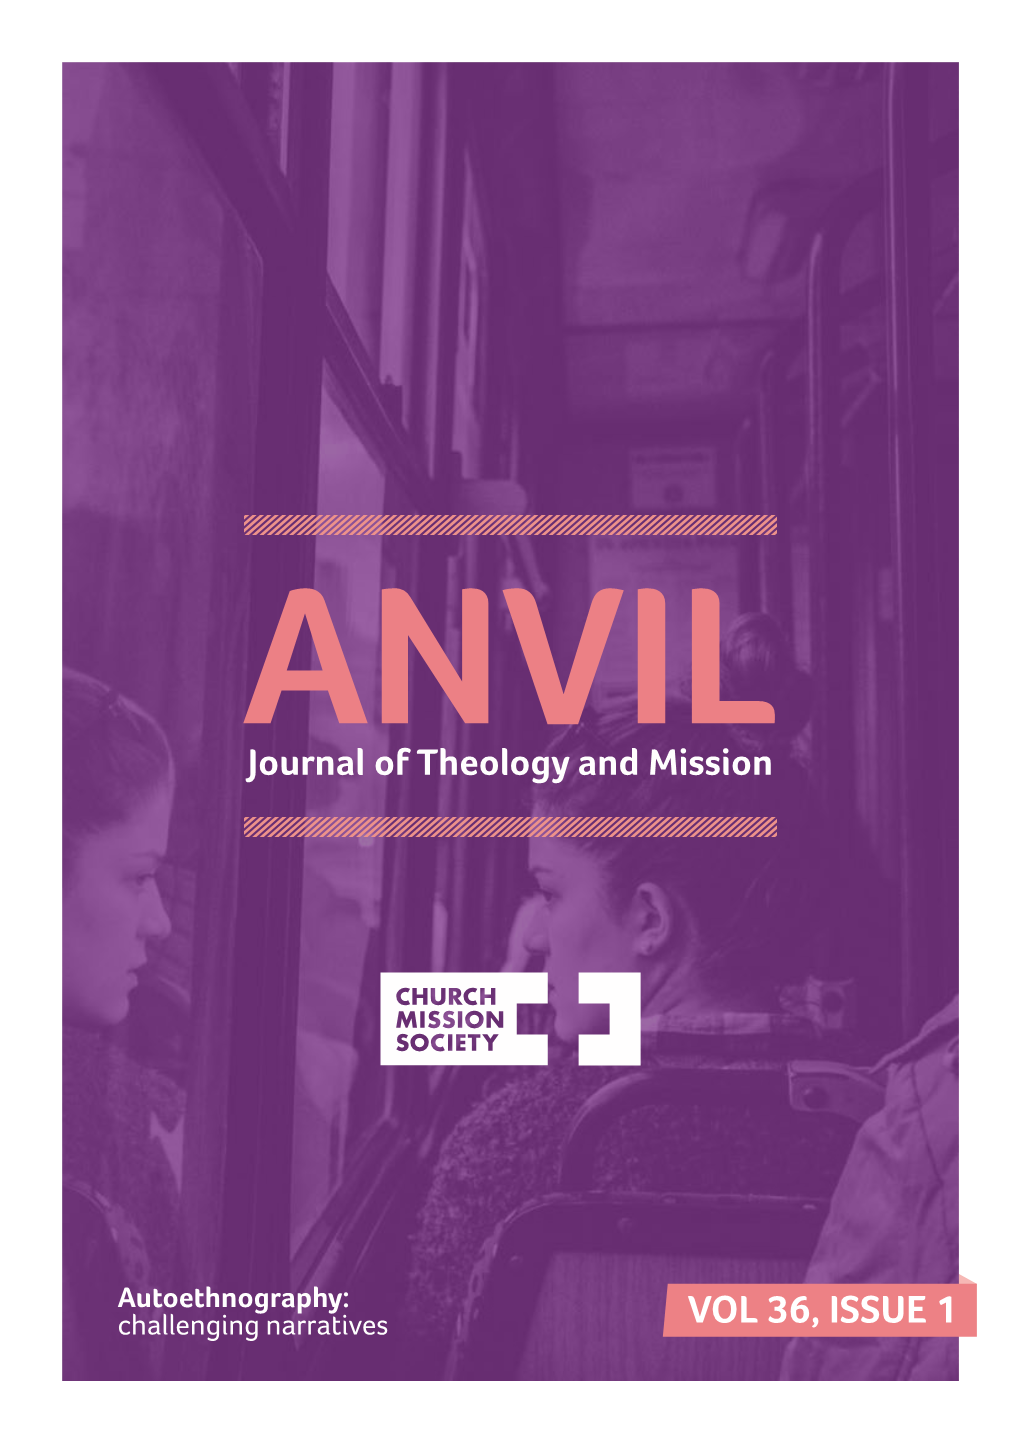 Vol 36, Issue 1 Welcome to This Edition of Anvil